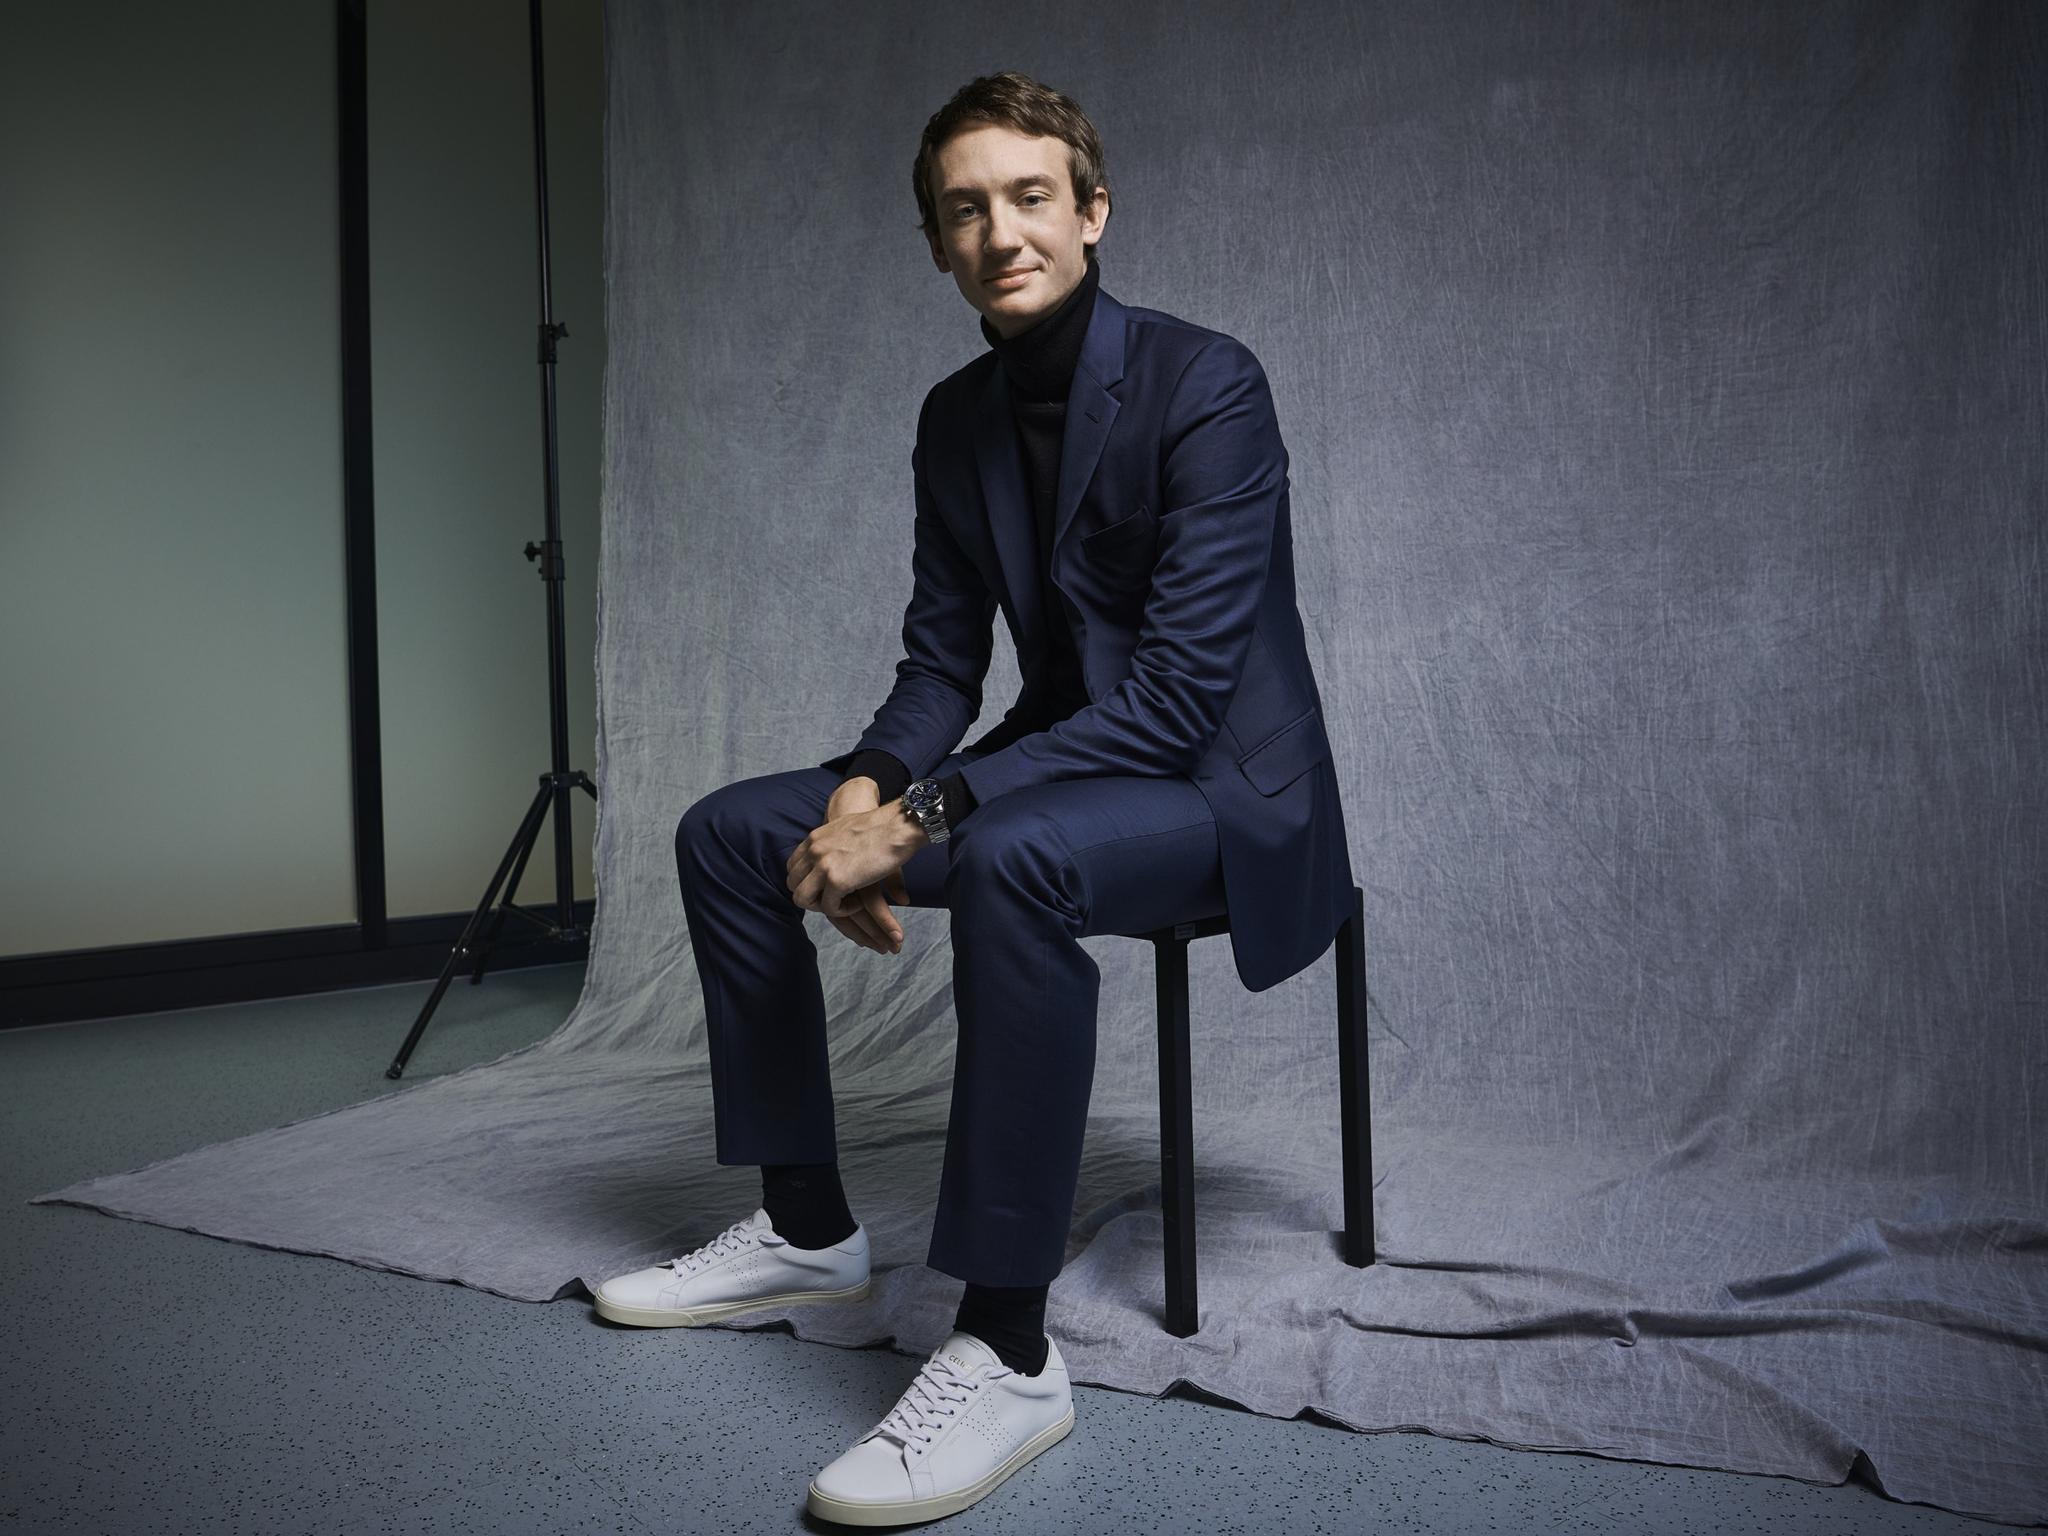 Tag Heuer's Frederic Arnault calls for agility in business